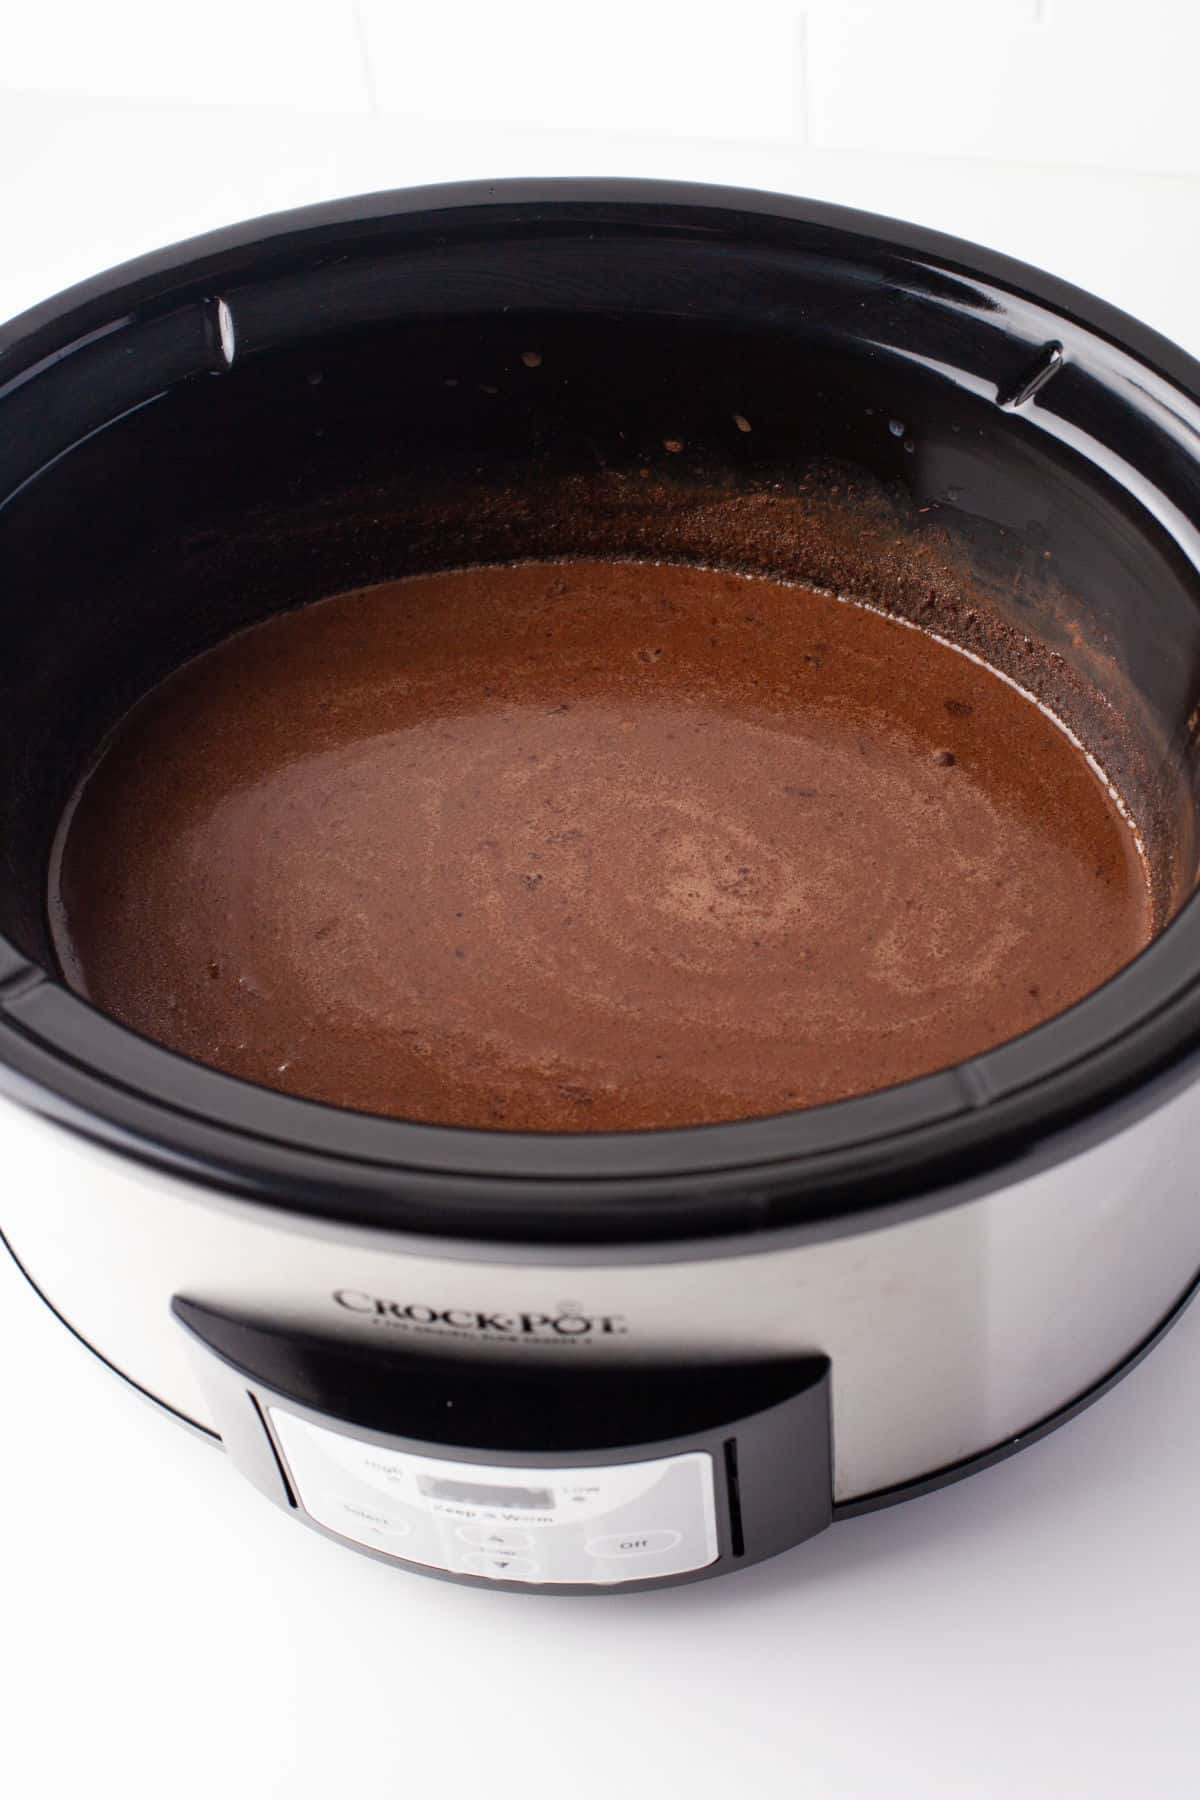 Cornstarch mixed into hot chocolate mixture in a slow cooker. 